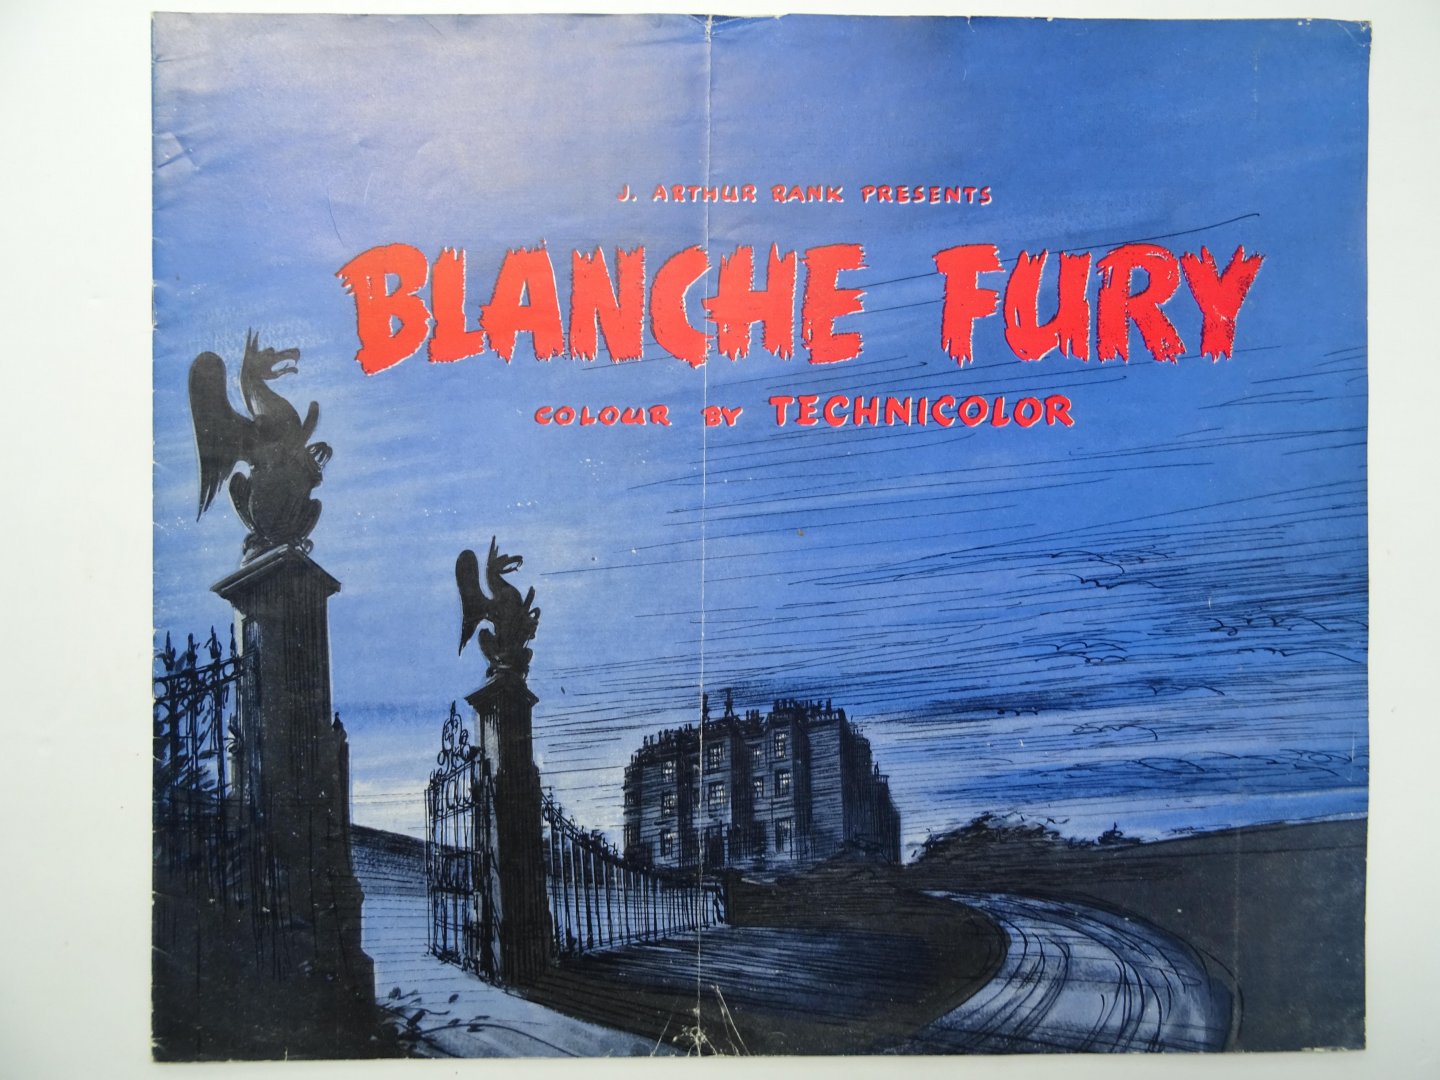 Redactie. - Affiche / reclameblad film: Blanche fury. Starring: Stewart Granger and Valery Hobson. A Cineguild Production.